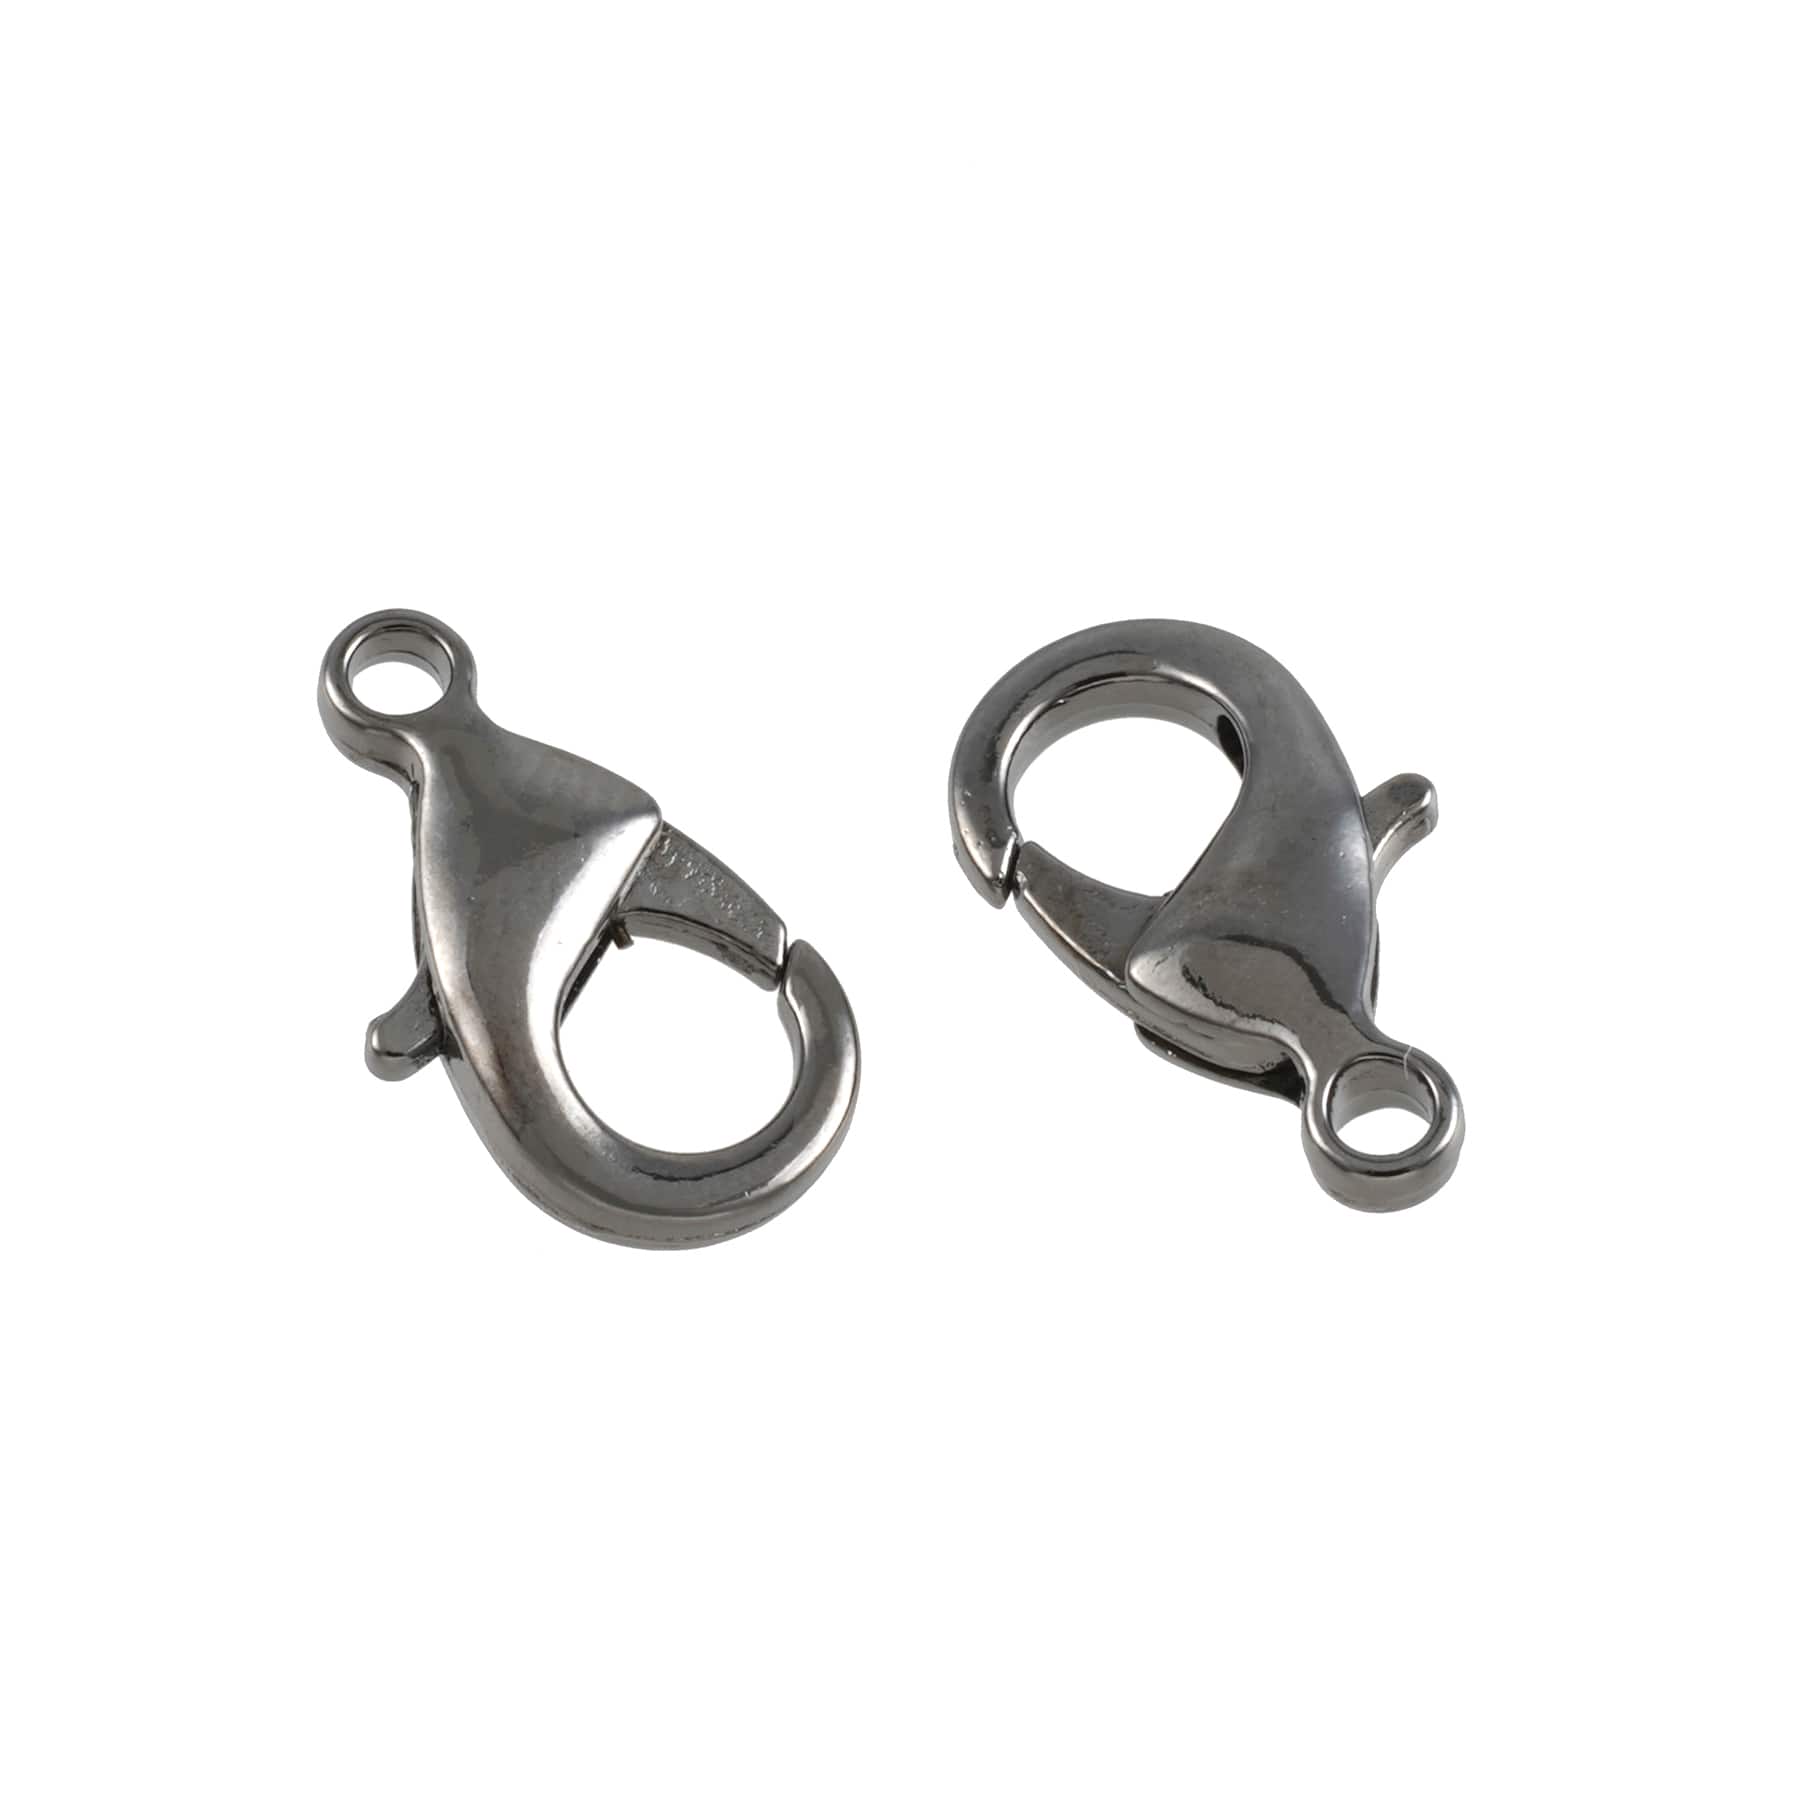 Bead Landing Lobster Claw Clasps - Oxidized Silver - 10 ct